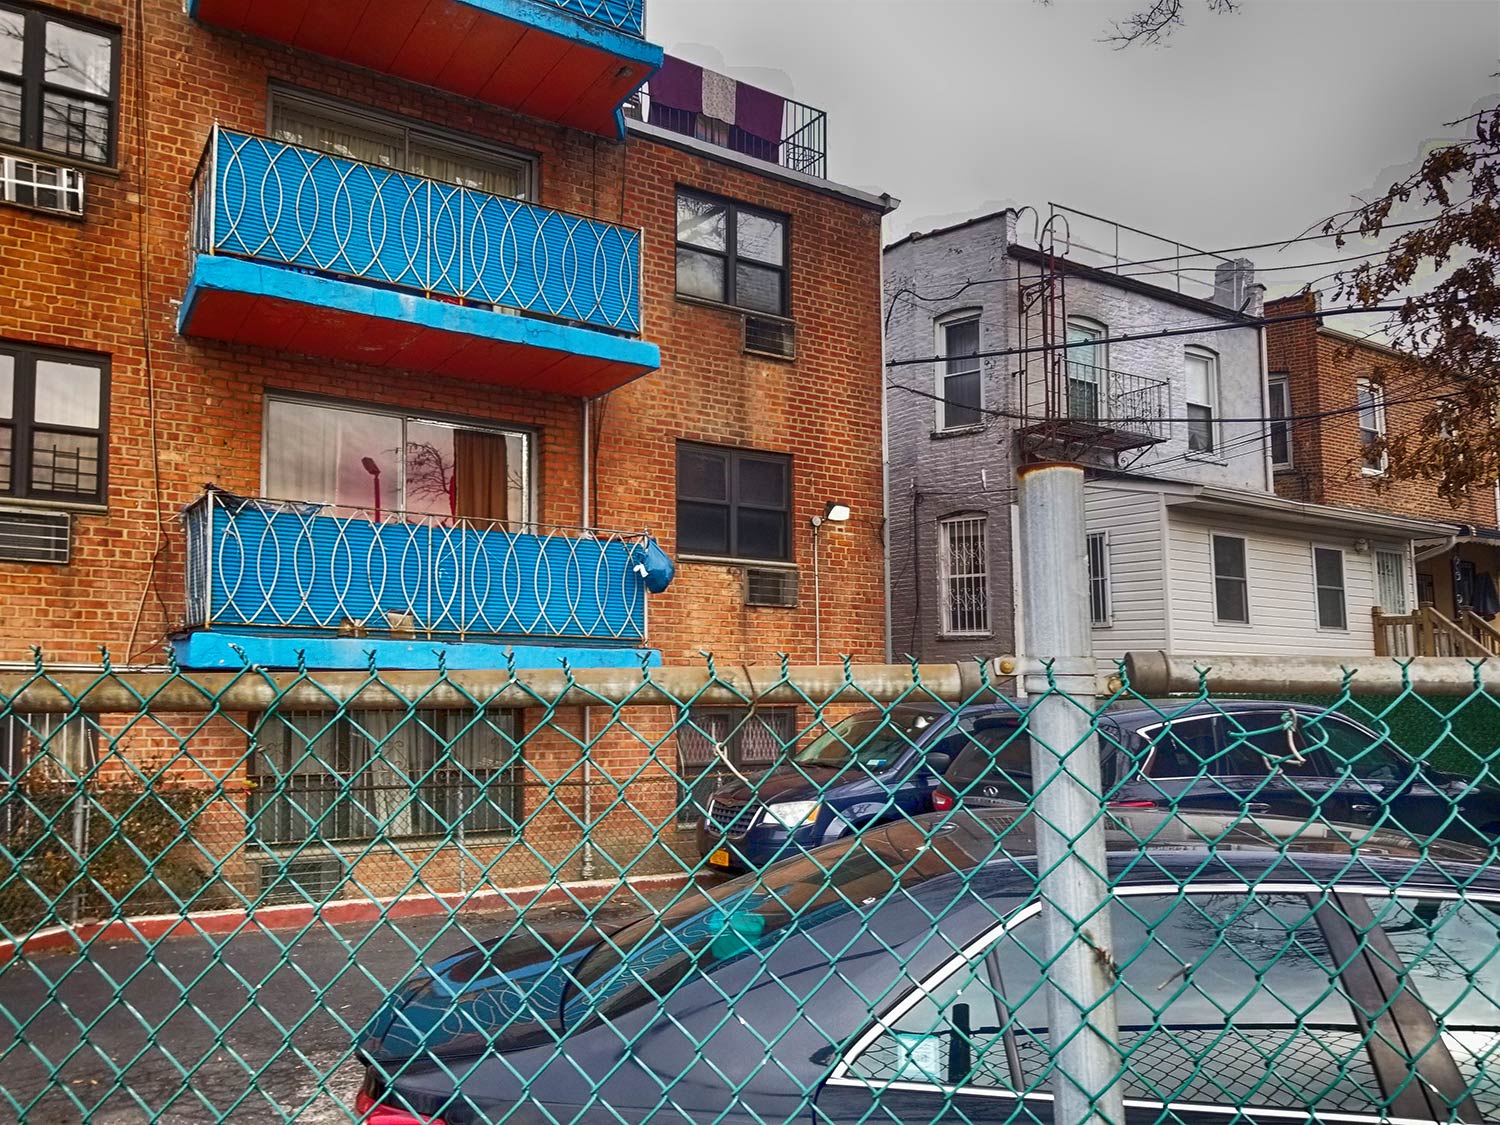 Terraced Apartments, Bronx NY ©2021 by bret wills